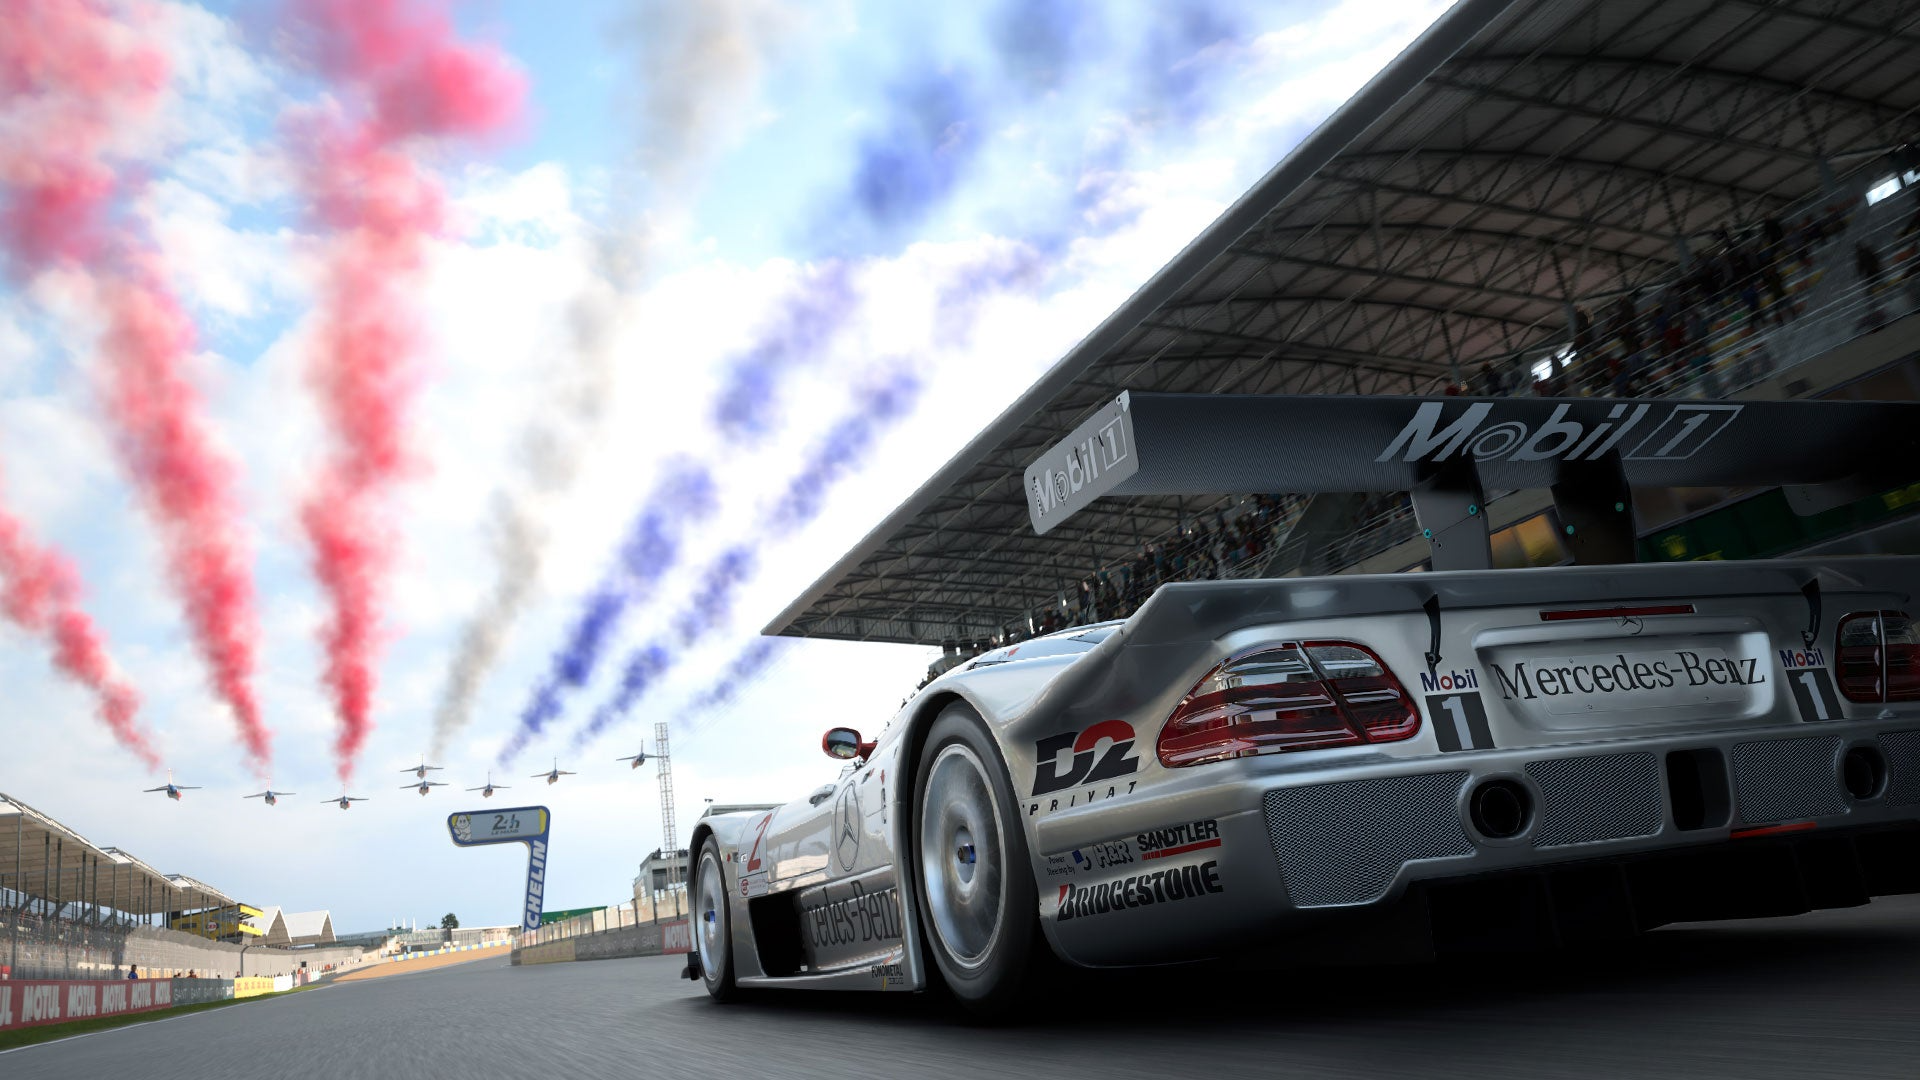 Gran Turismo will be released in theaters on August 11, 2023. The first video of the film has been published